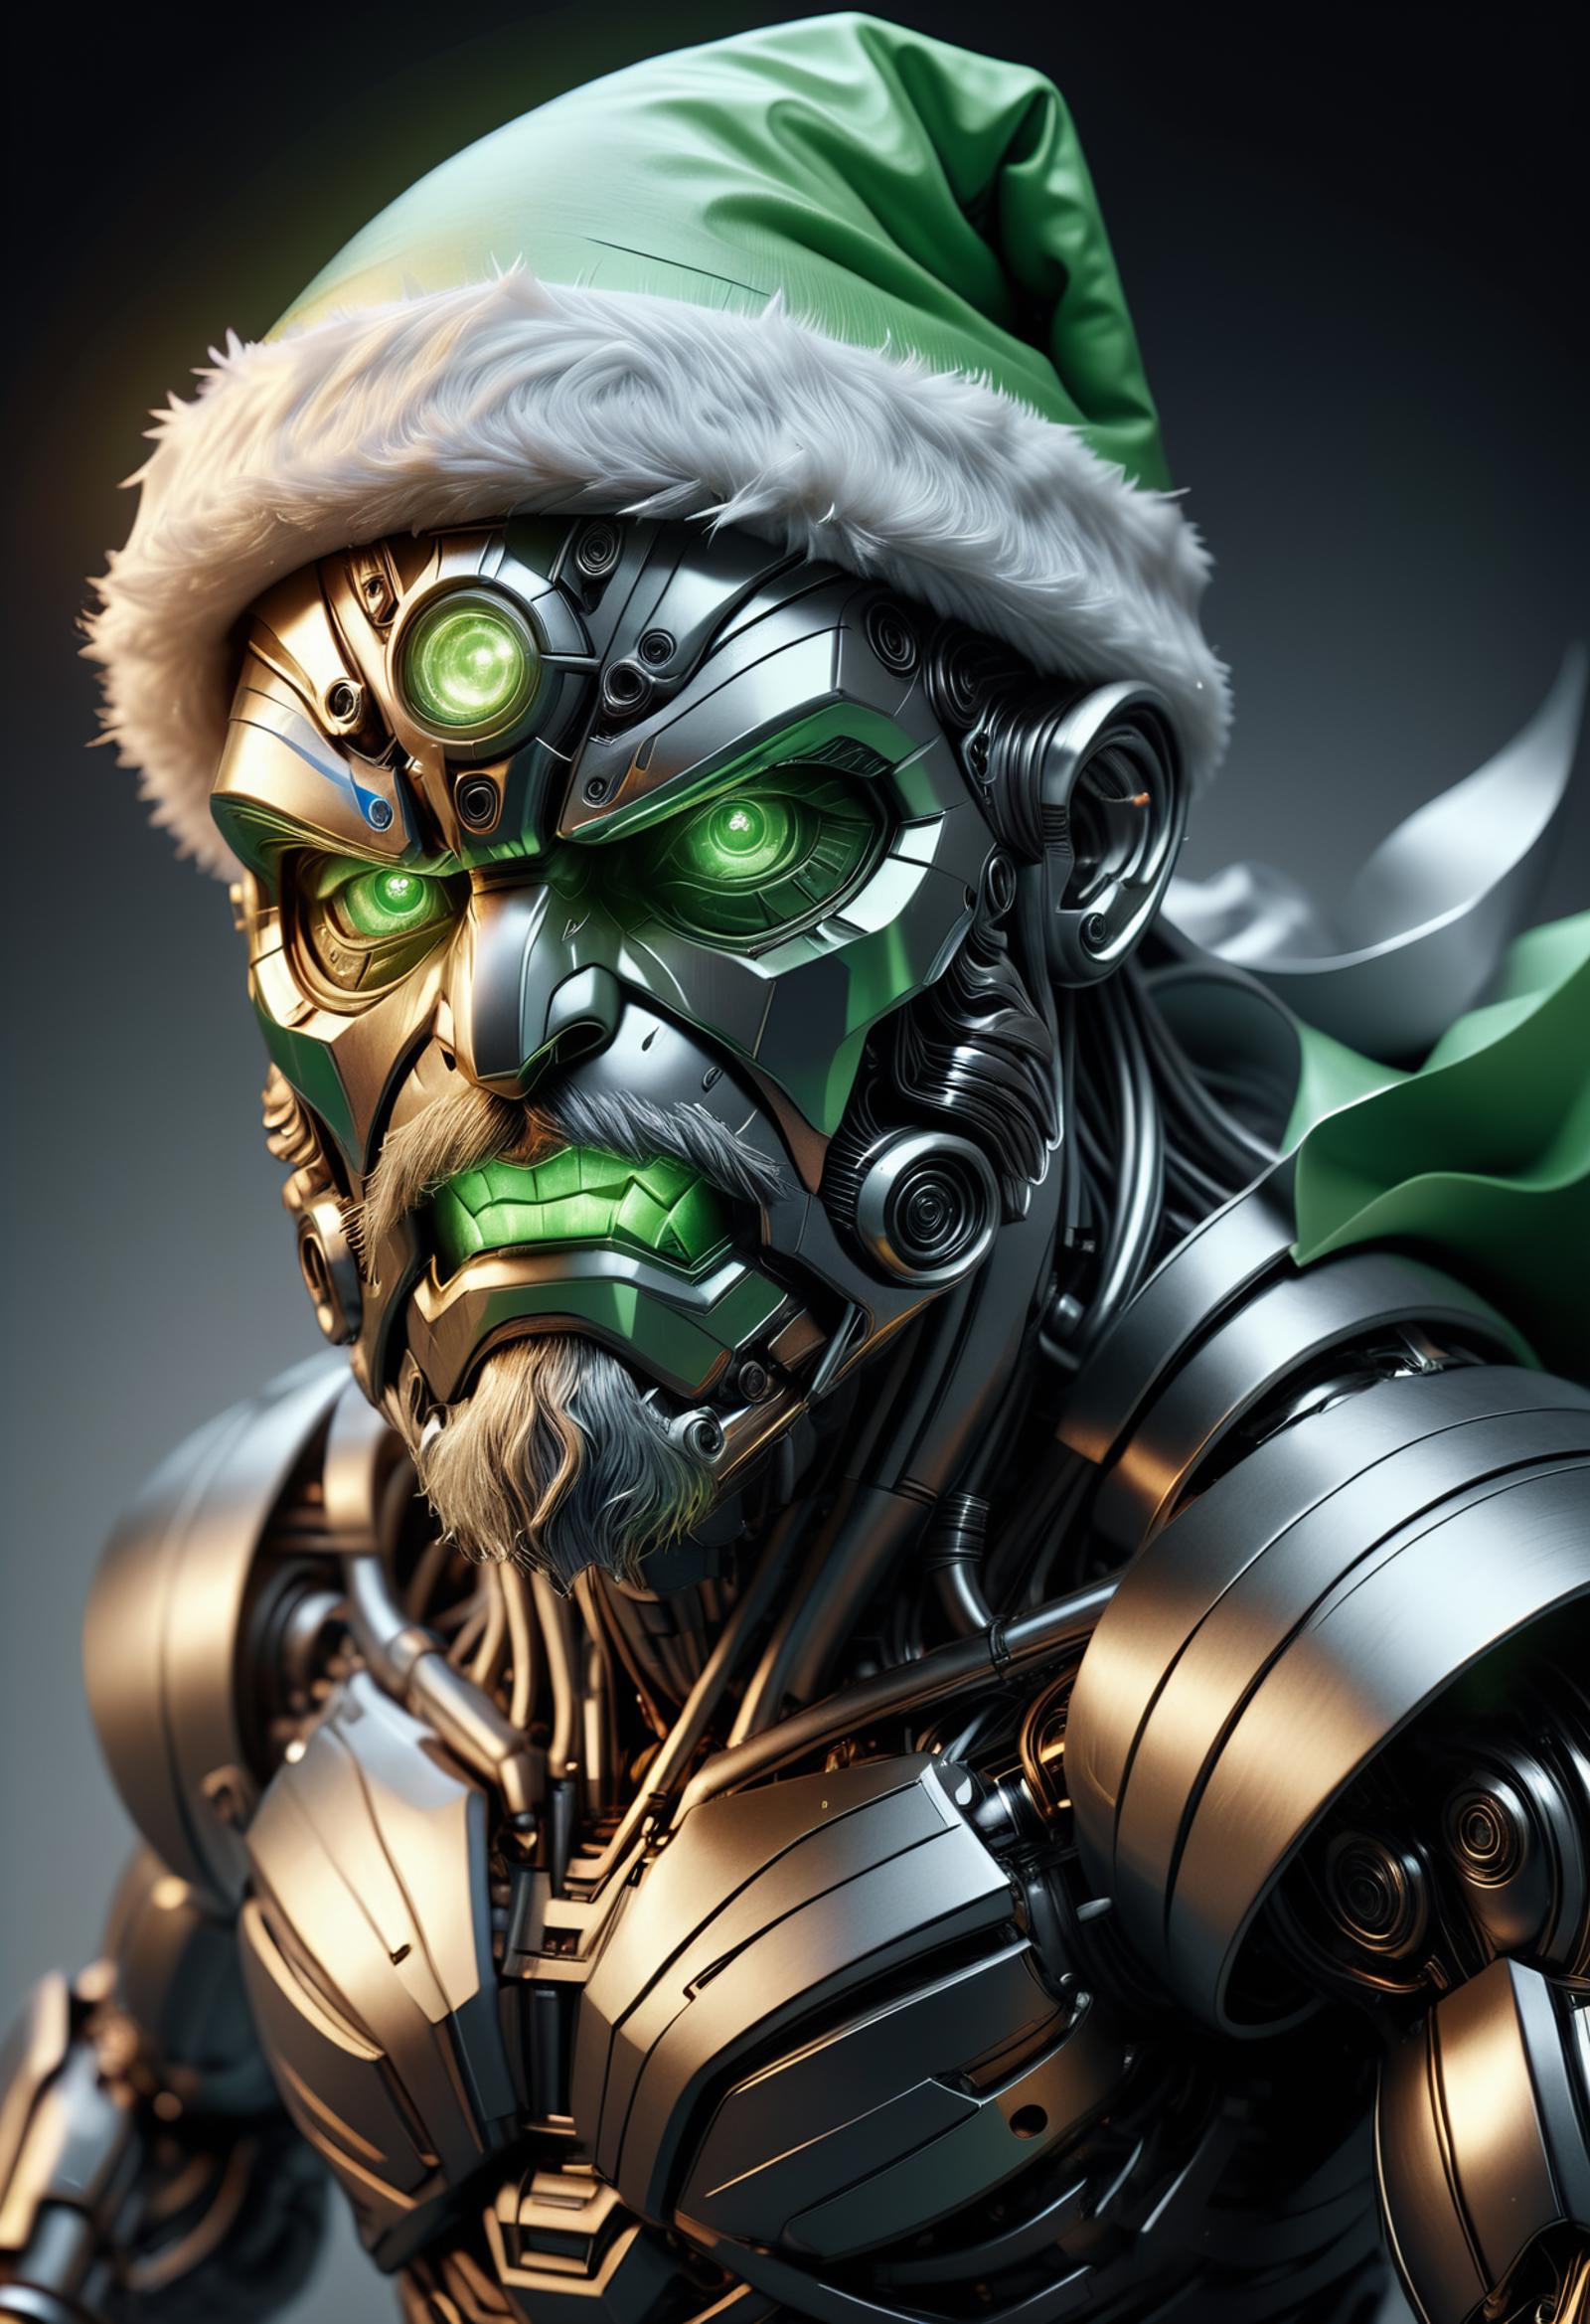 A robot with a green face and Santa hat.